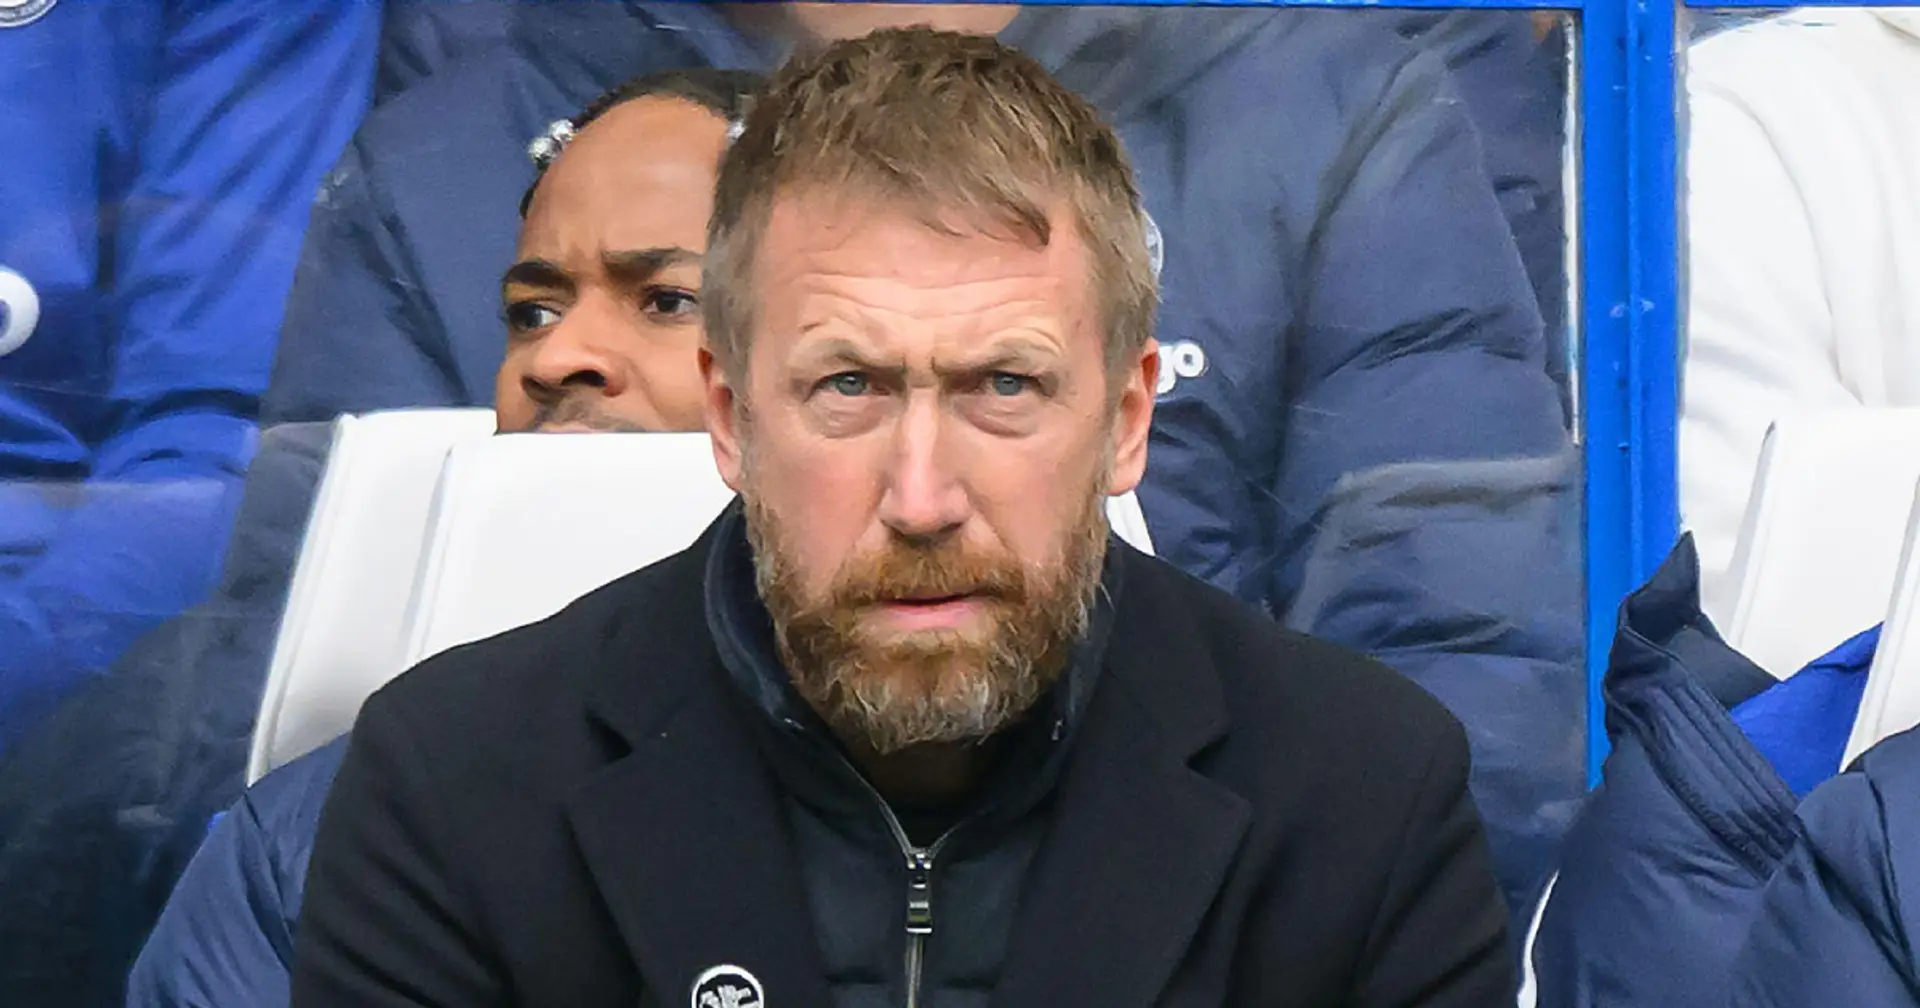 Graham Potter could be set for Premier League return, one interested club named (reliability: 3 stars) 